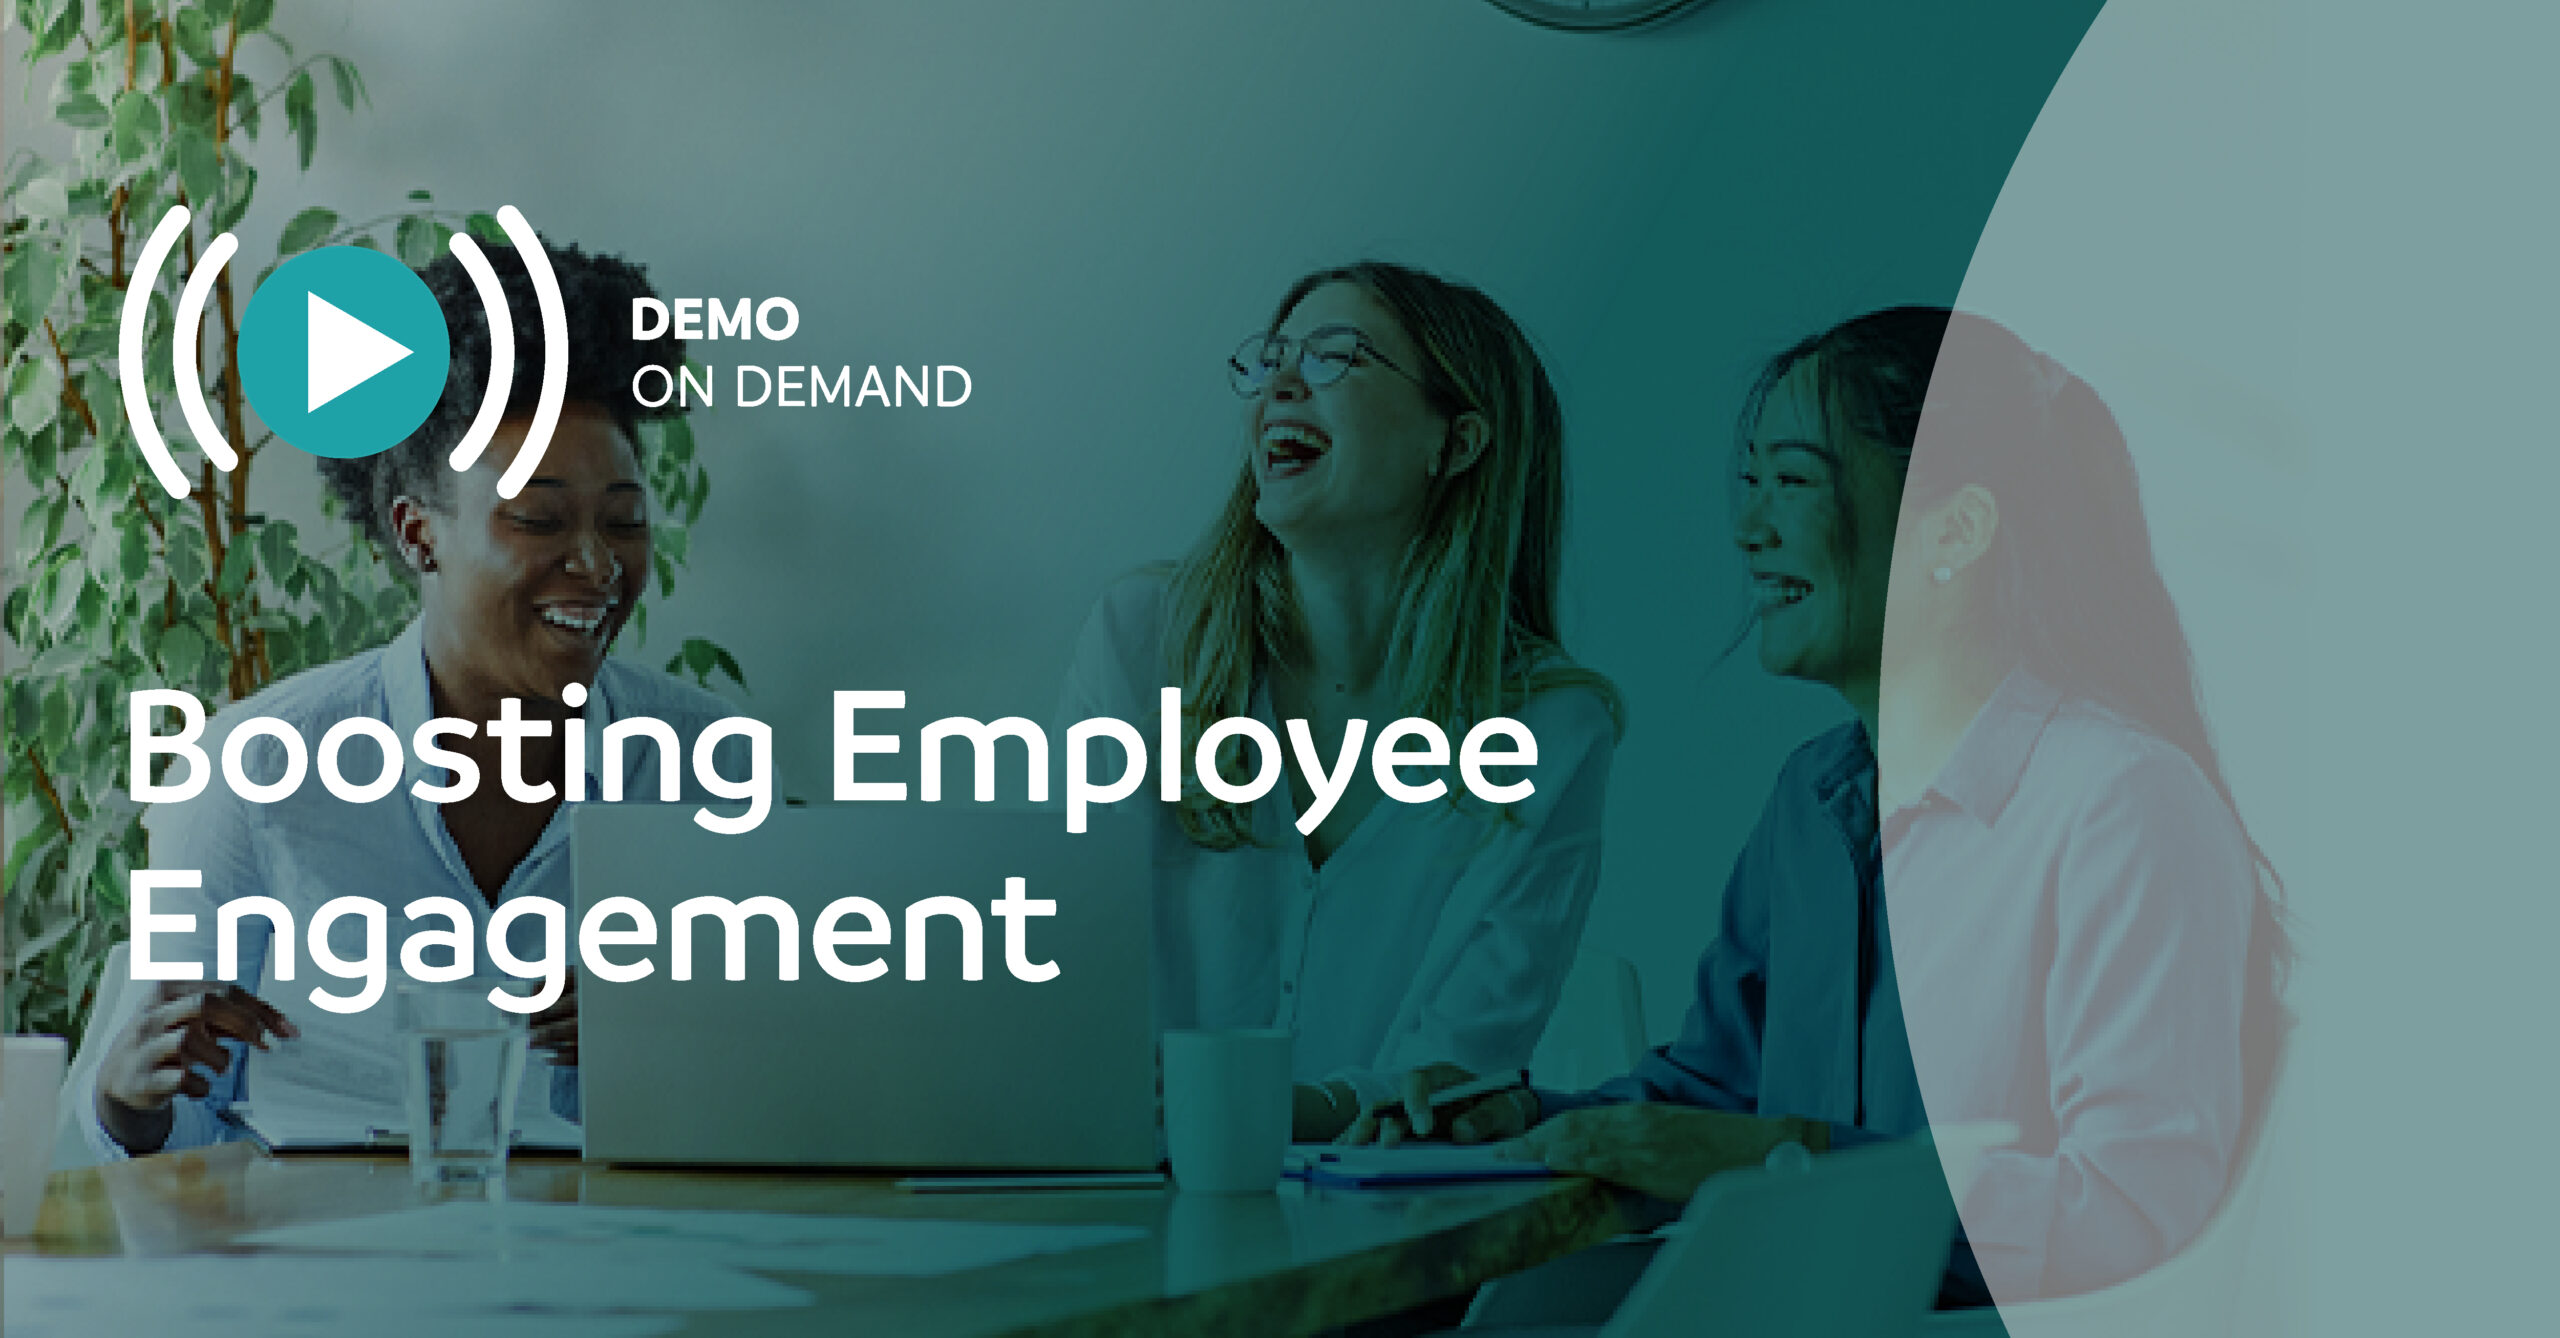 Boosting employee engagement past demo